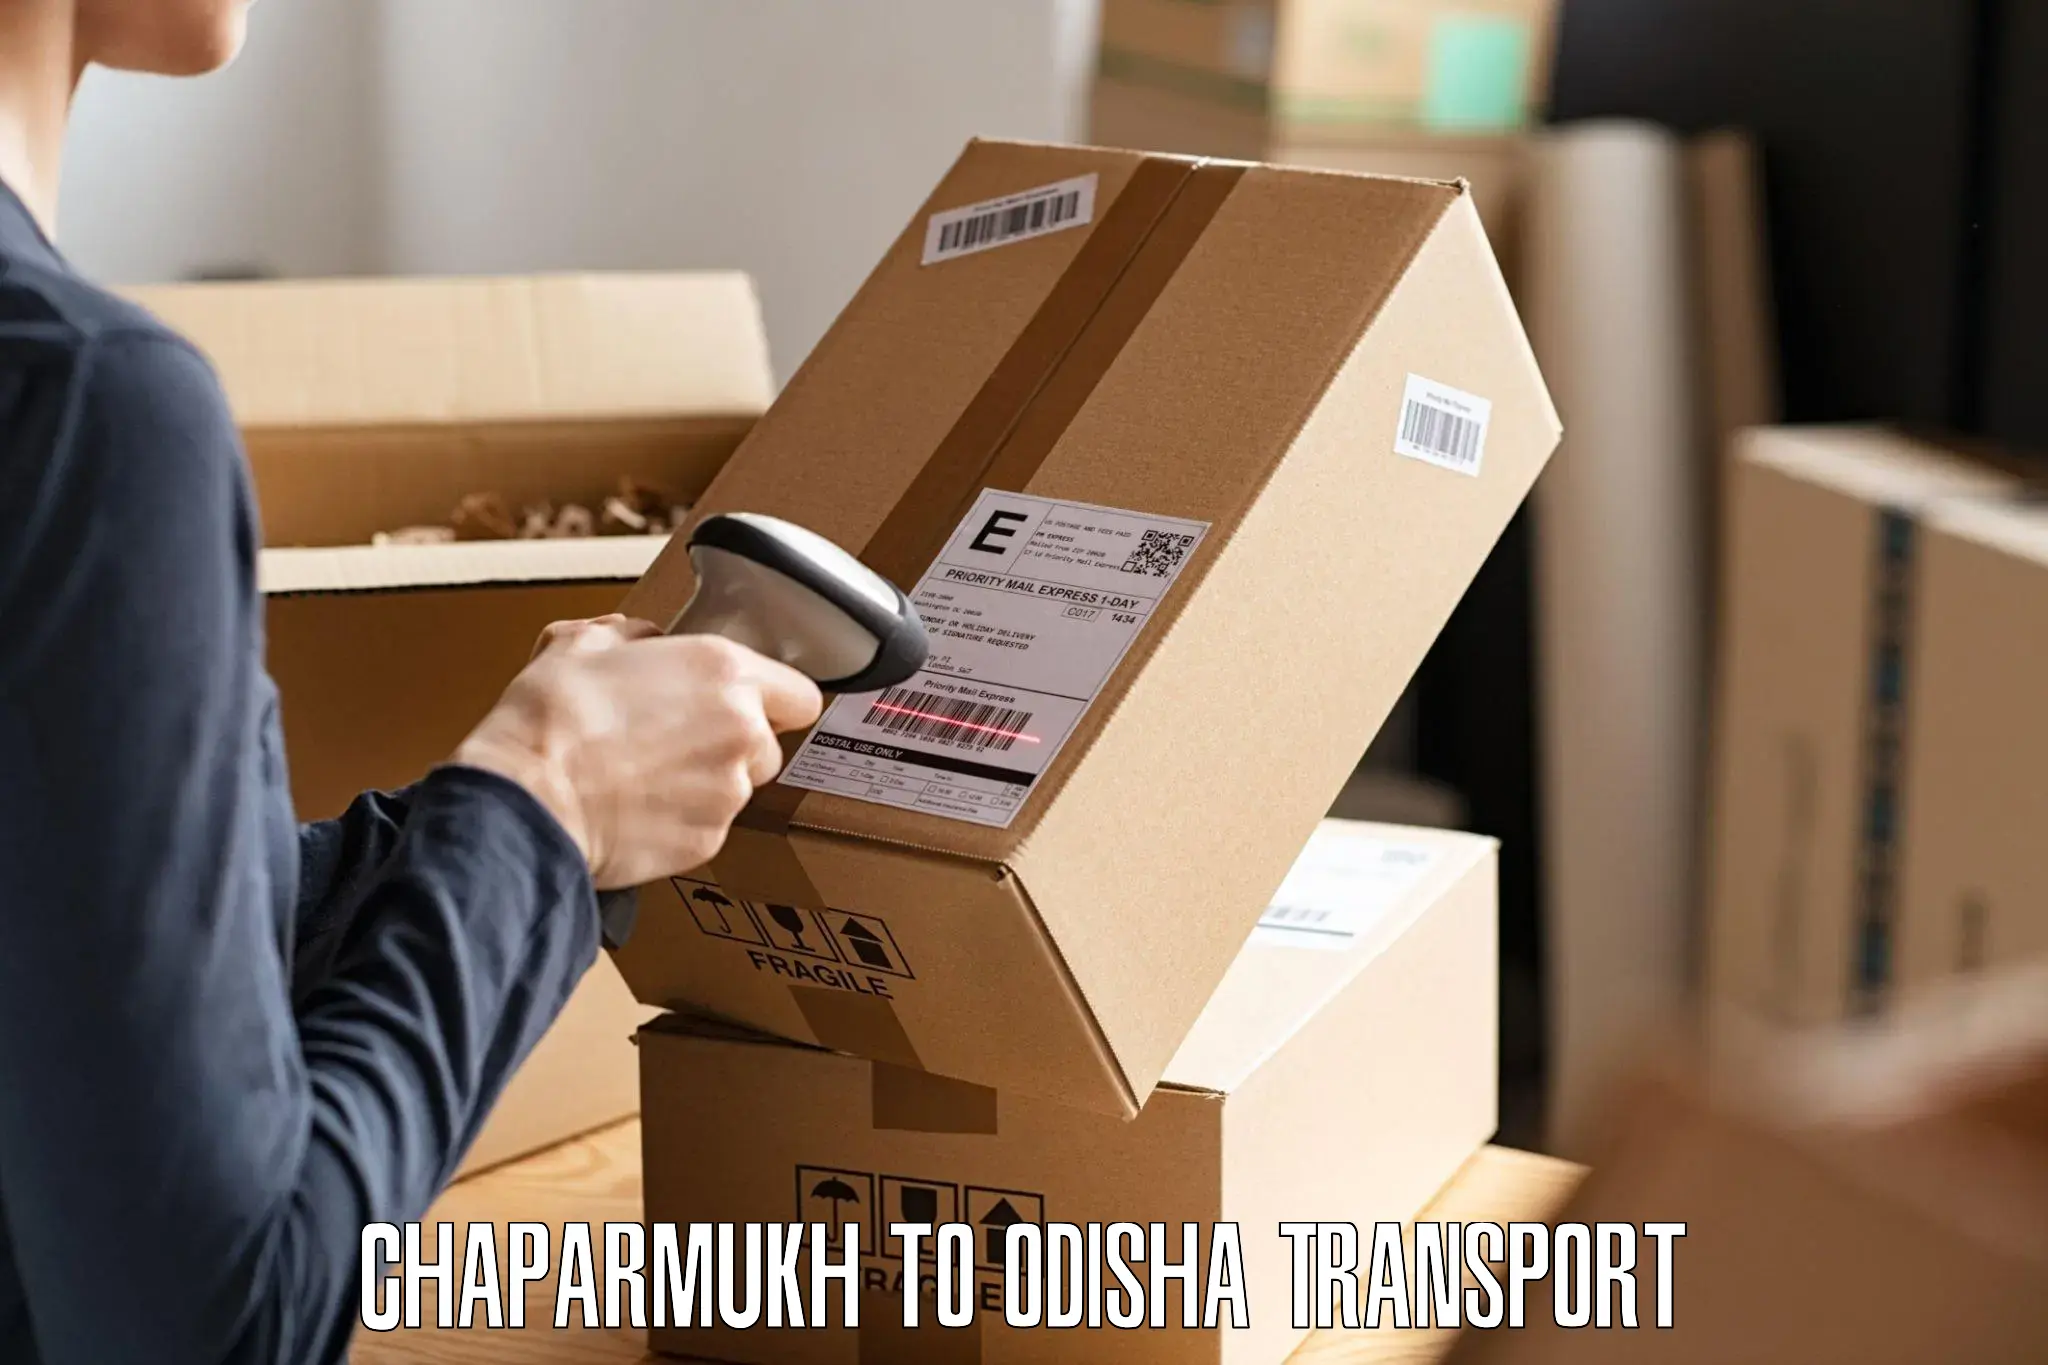 Material transport services Chaparmukh to Loisingha